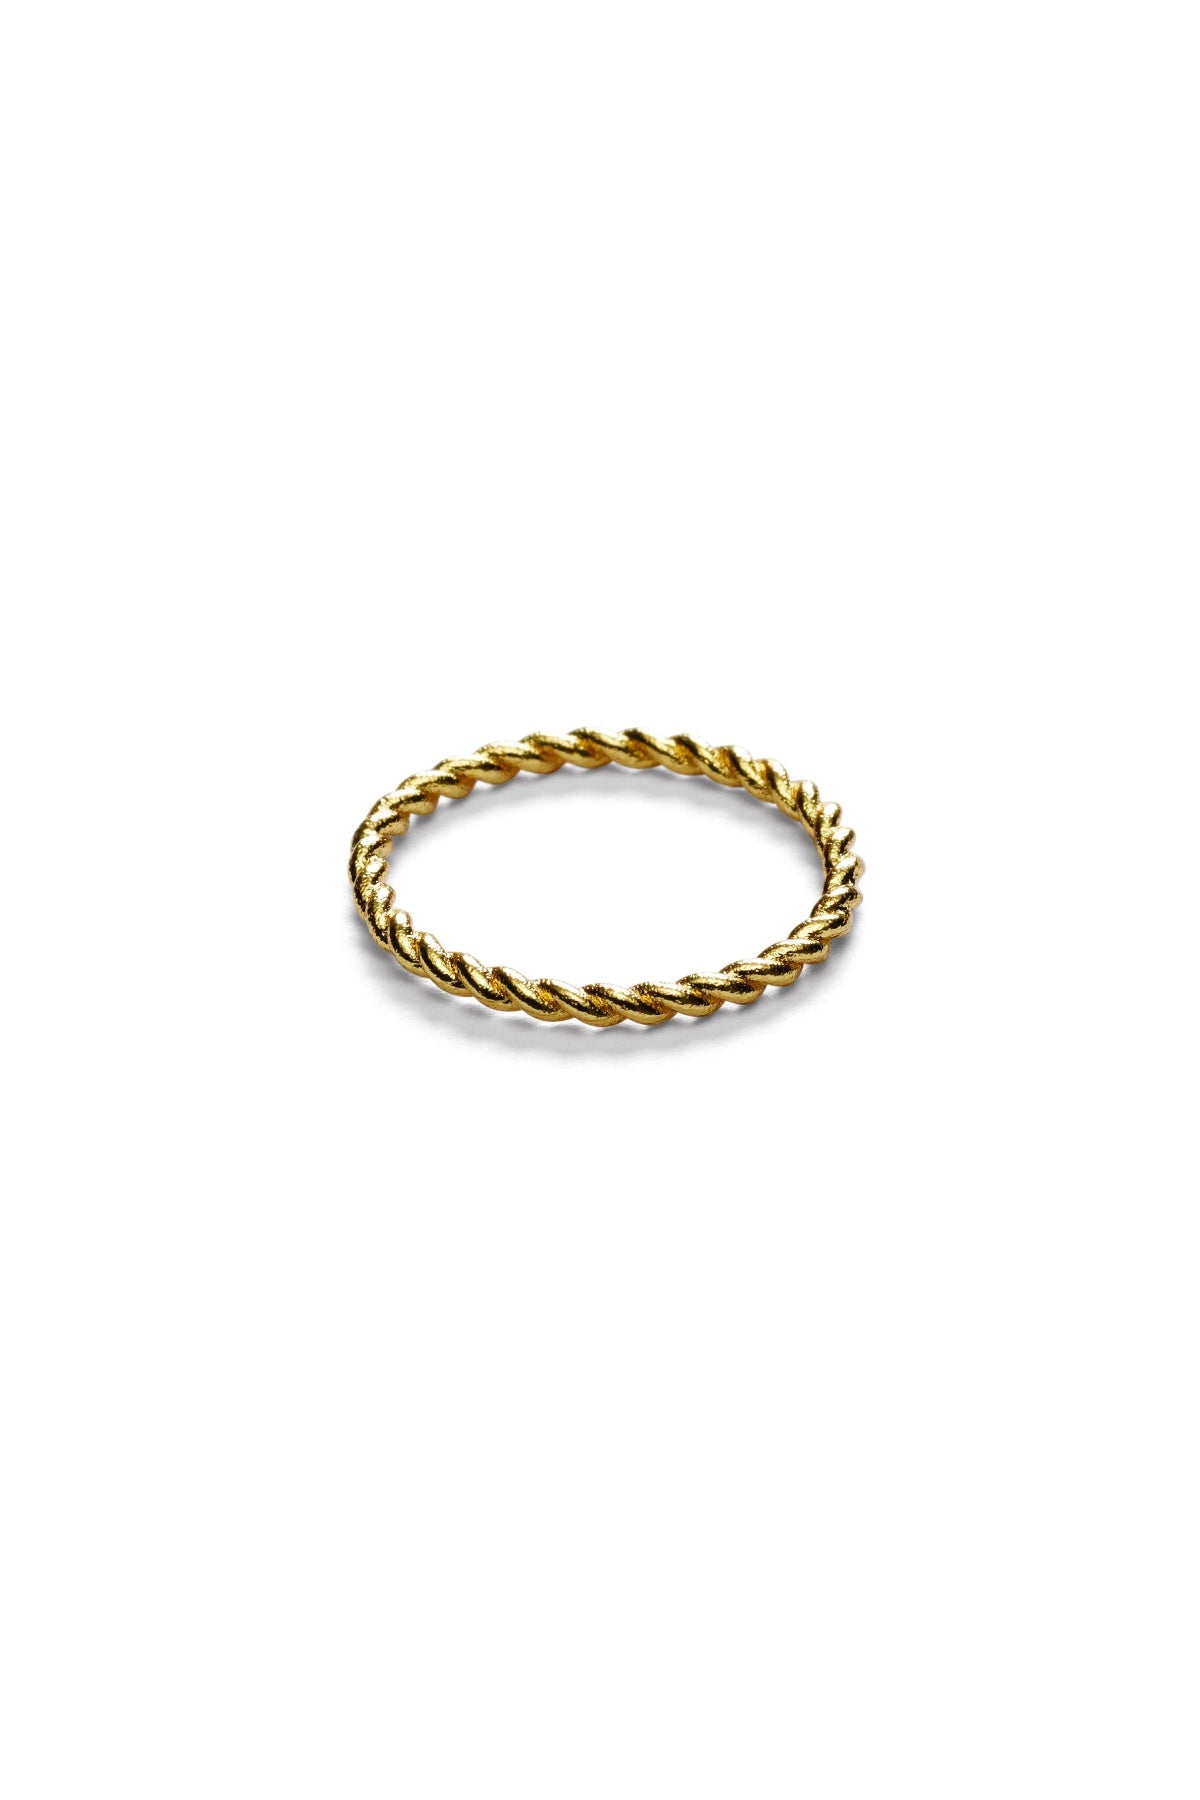 Anni Lu Twisted Ring - Gold